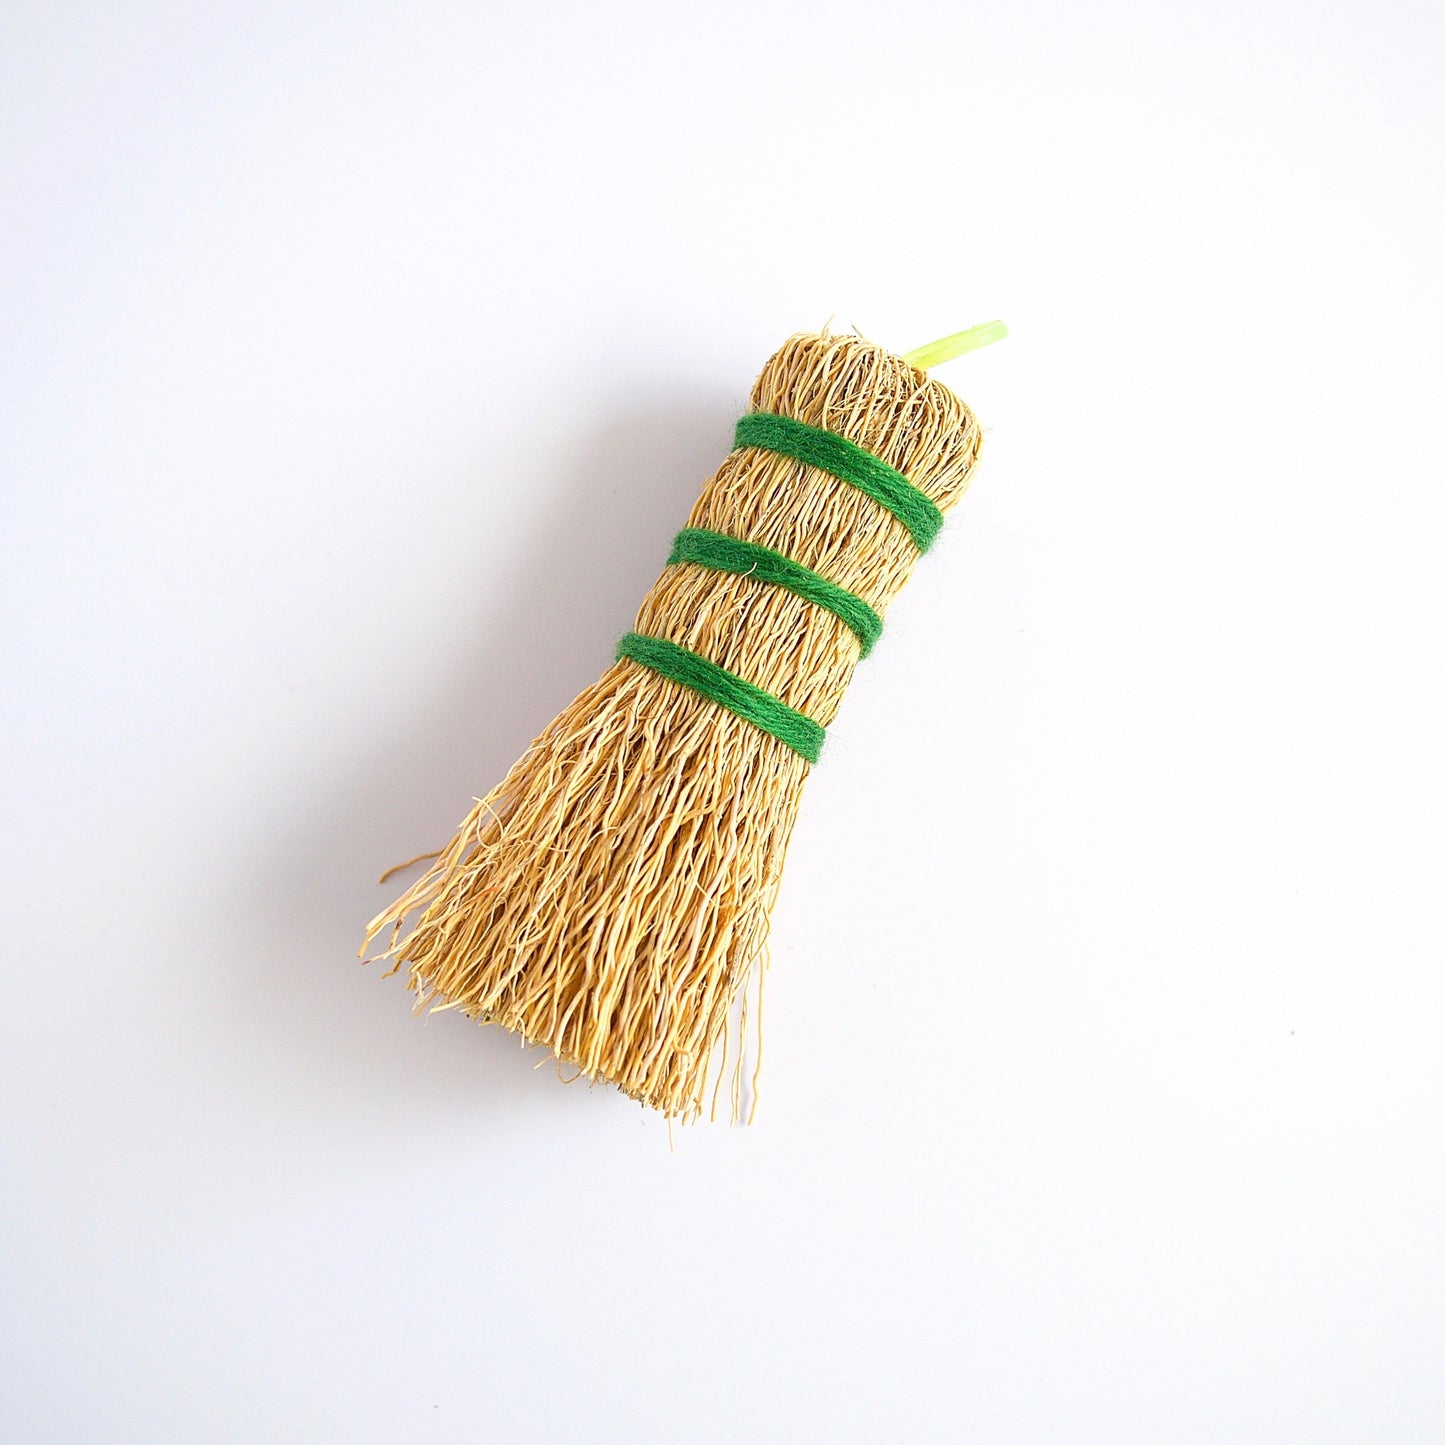 Escobeta de raiz Mexican dish scrubber made from plant roots wrapped in green wool yarn